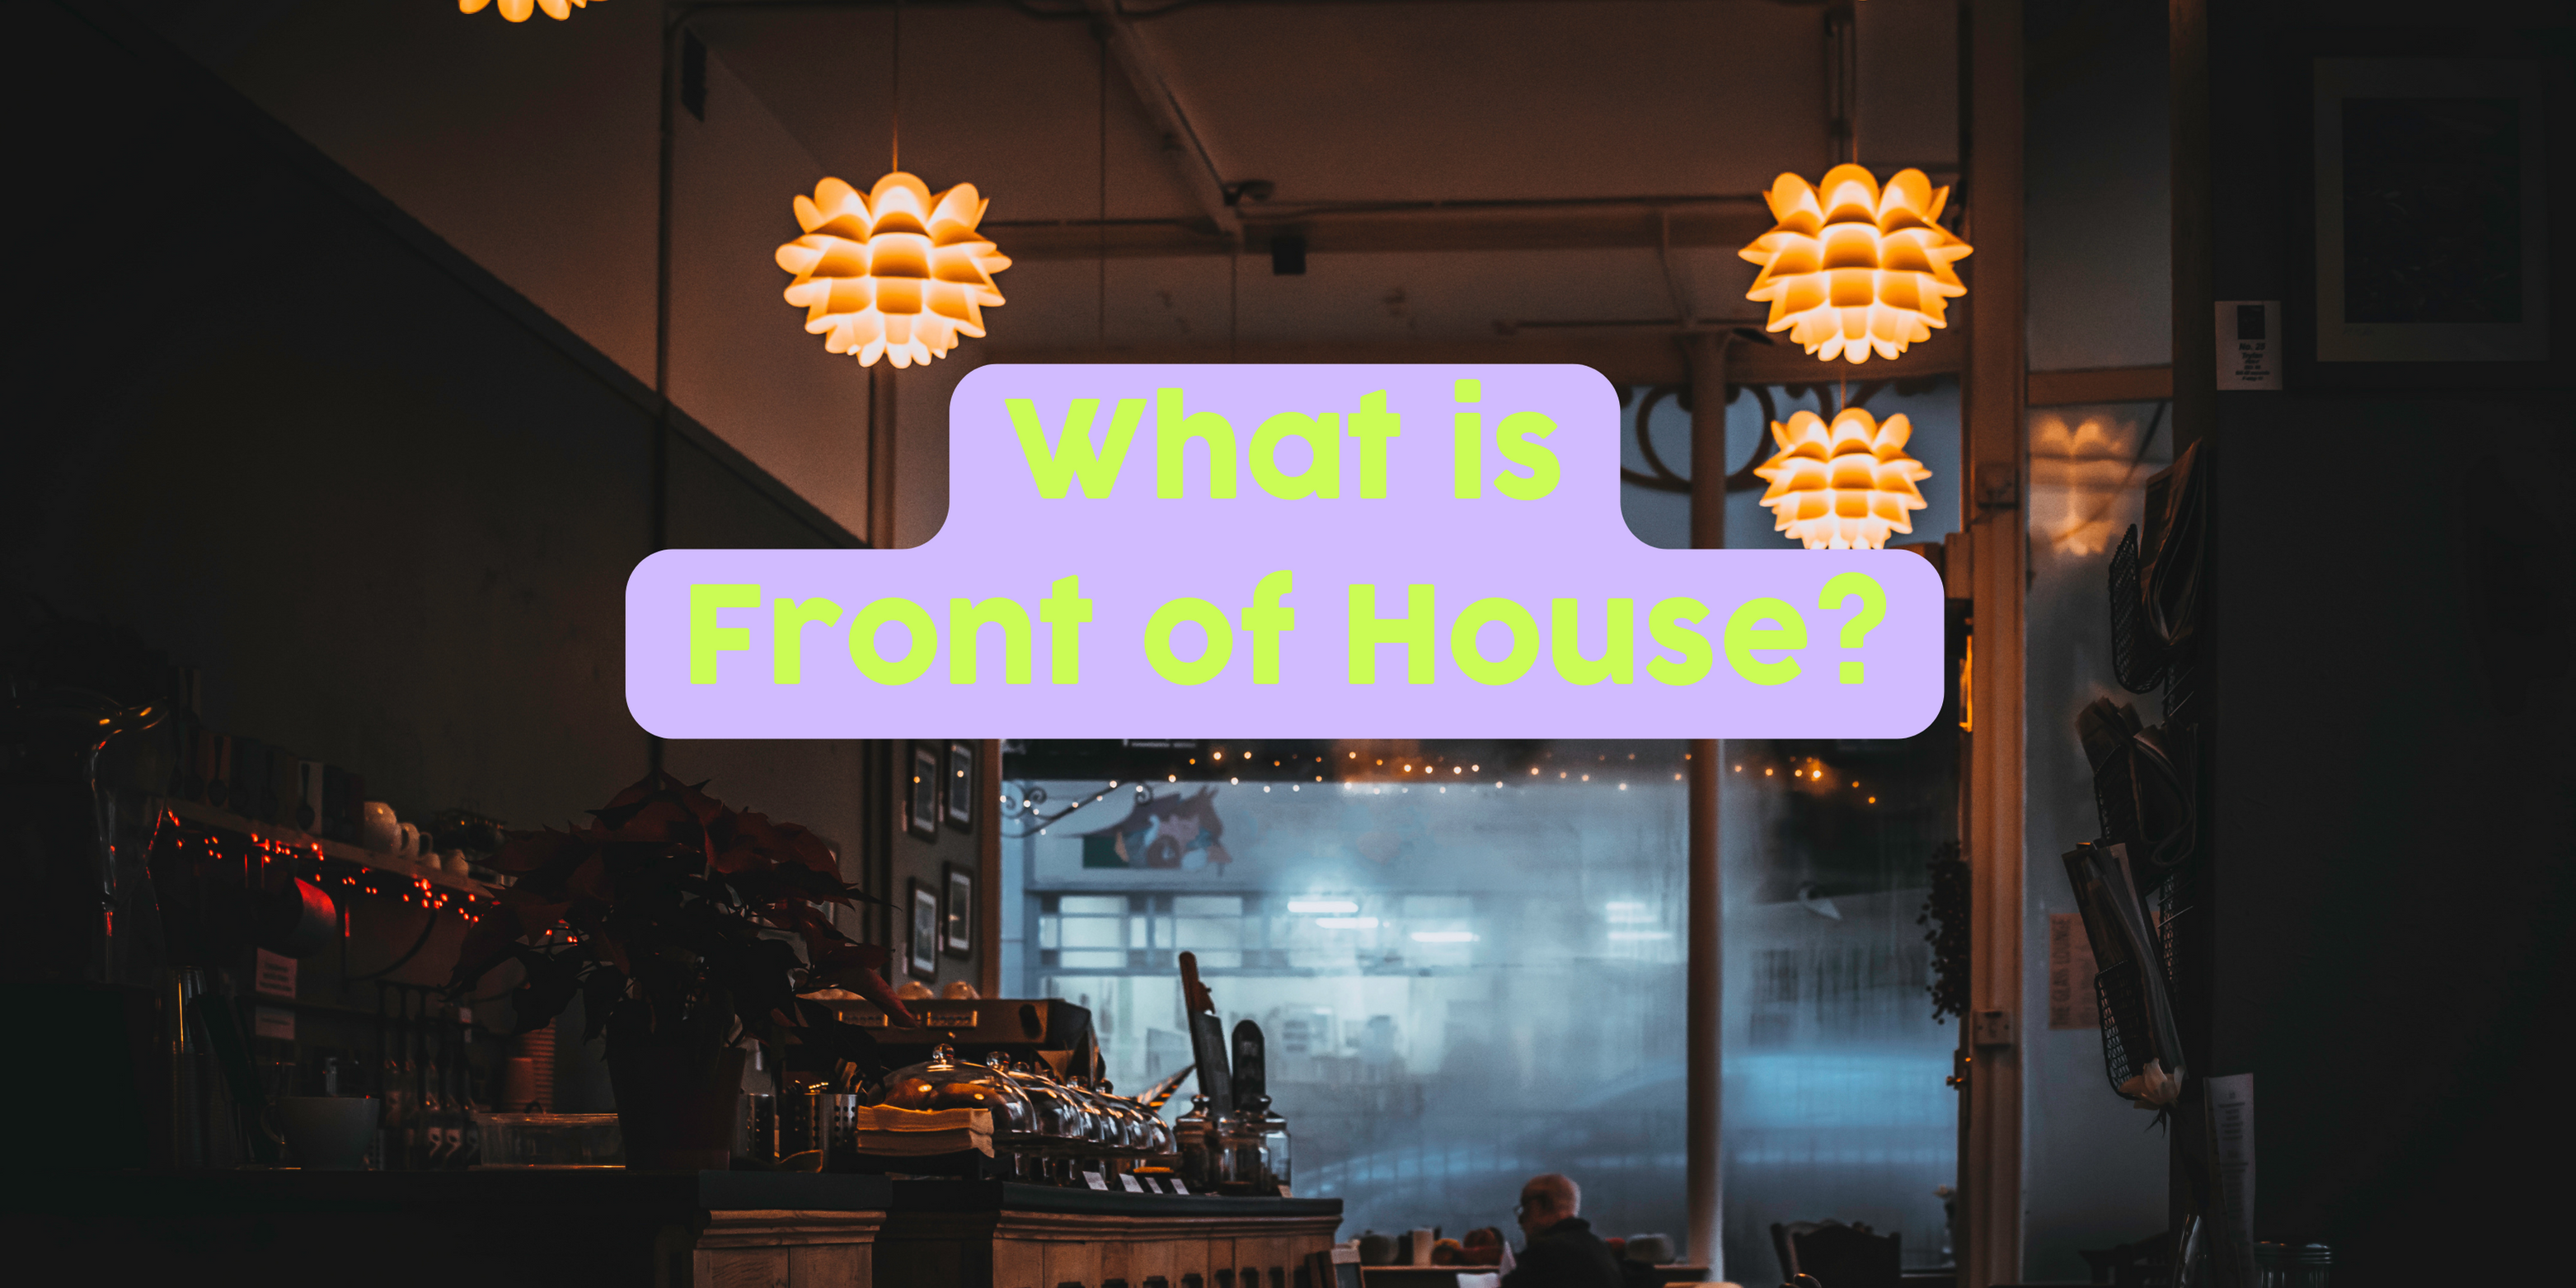 What is Front of House?